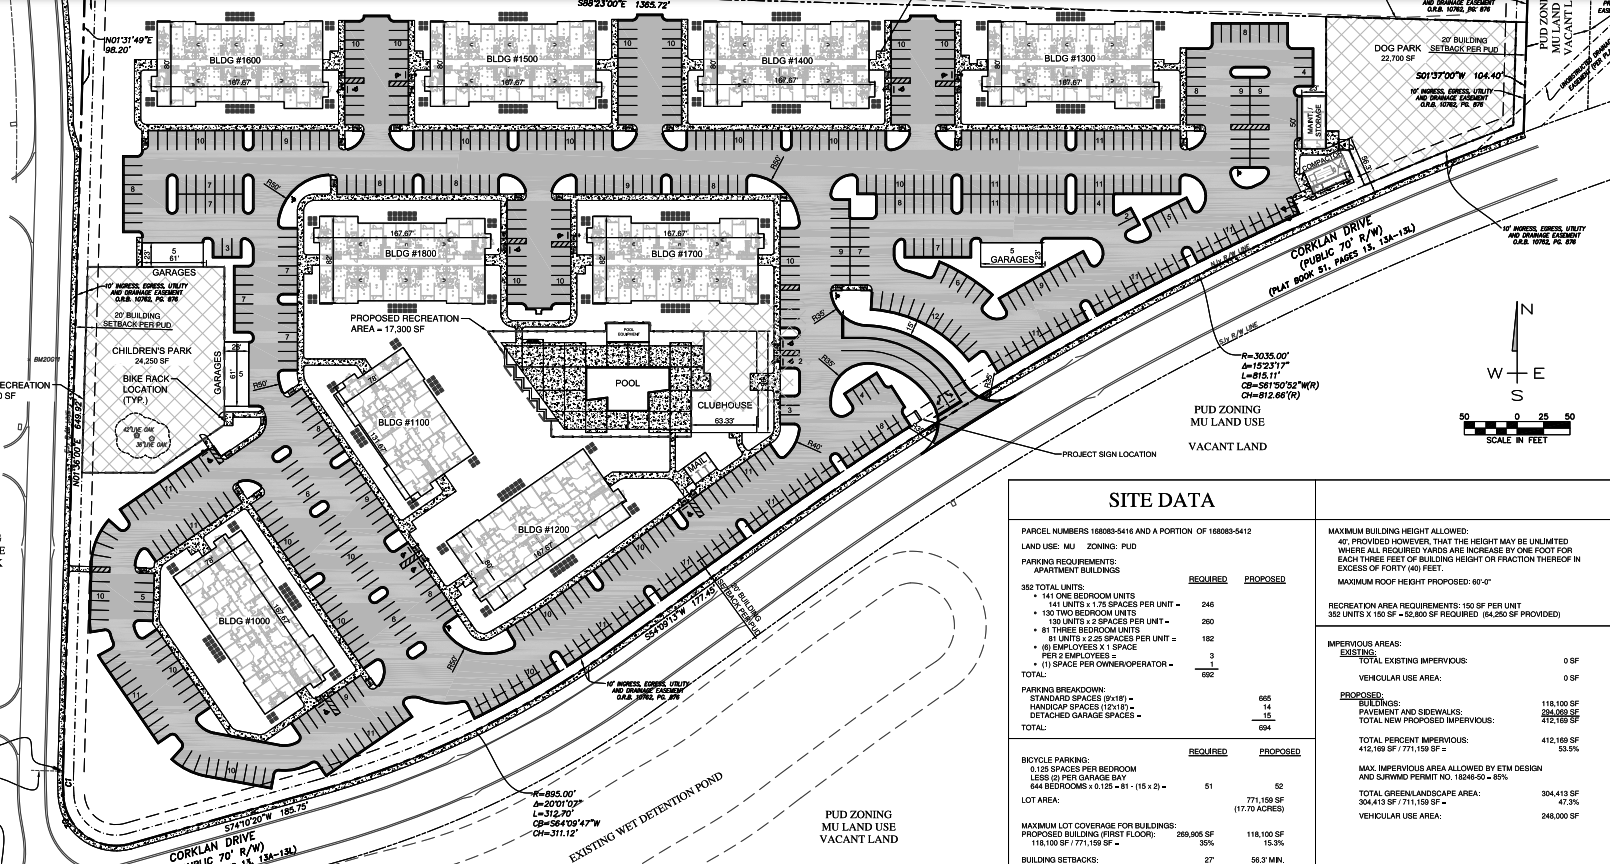 The site plan for Fountainhead Apartments.